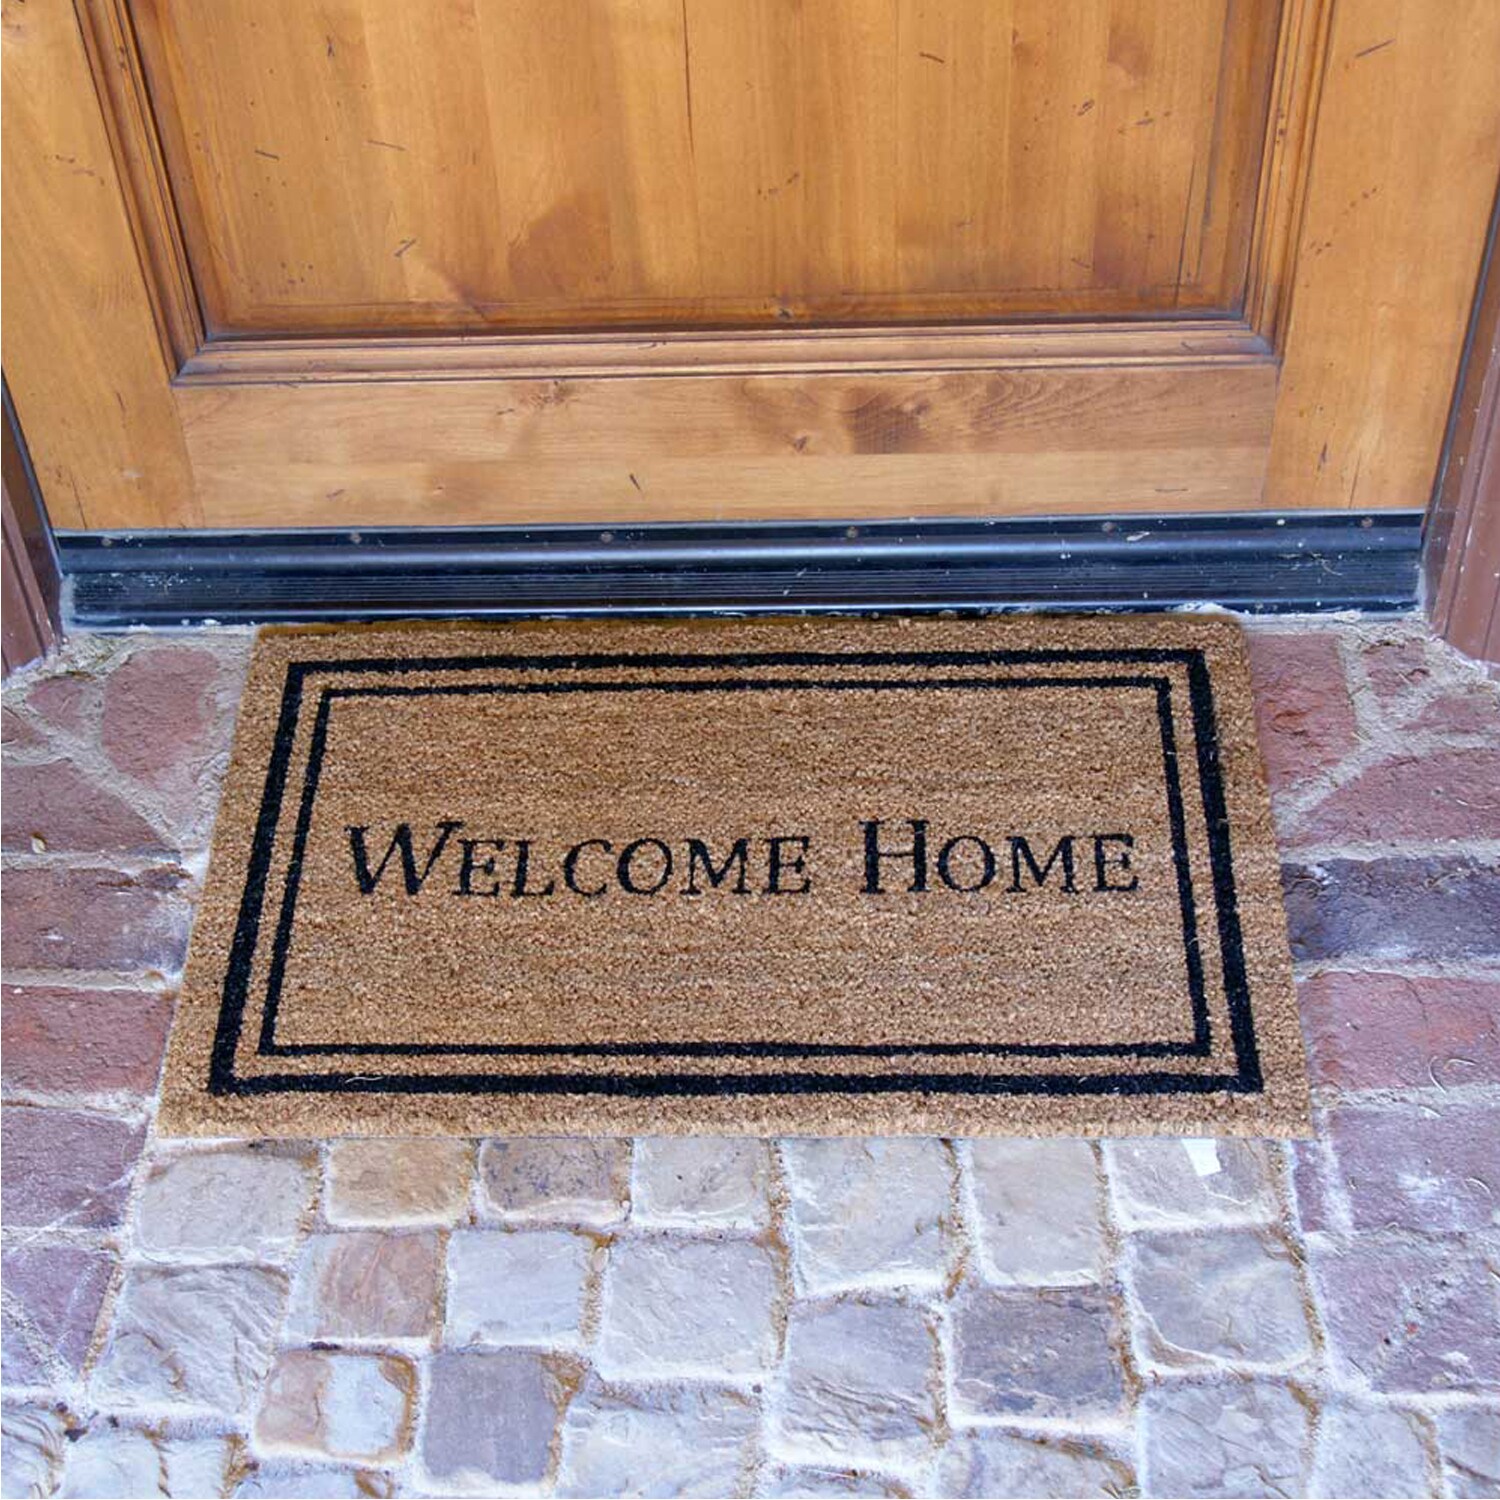 Three Reasons Why You Should Have a Front Door Mat At Your Doorstep